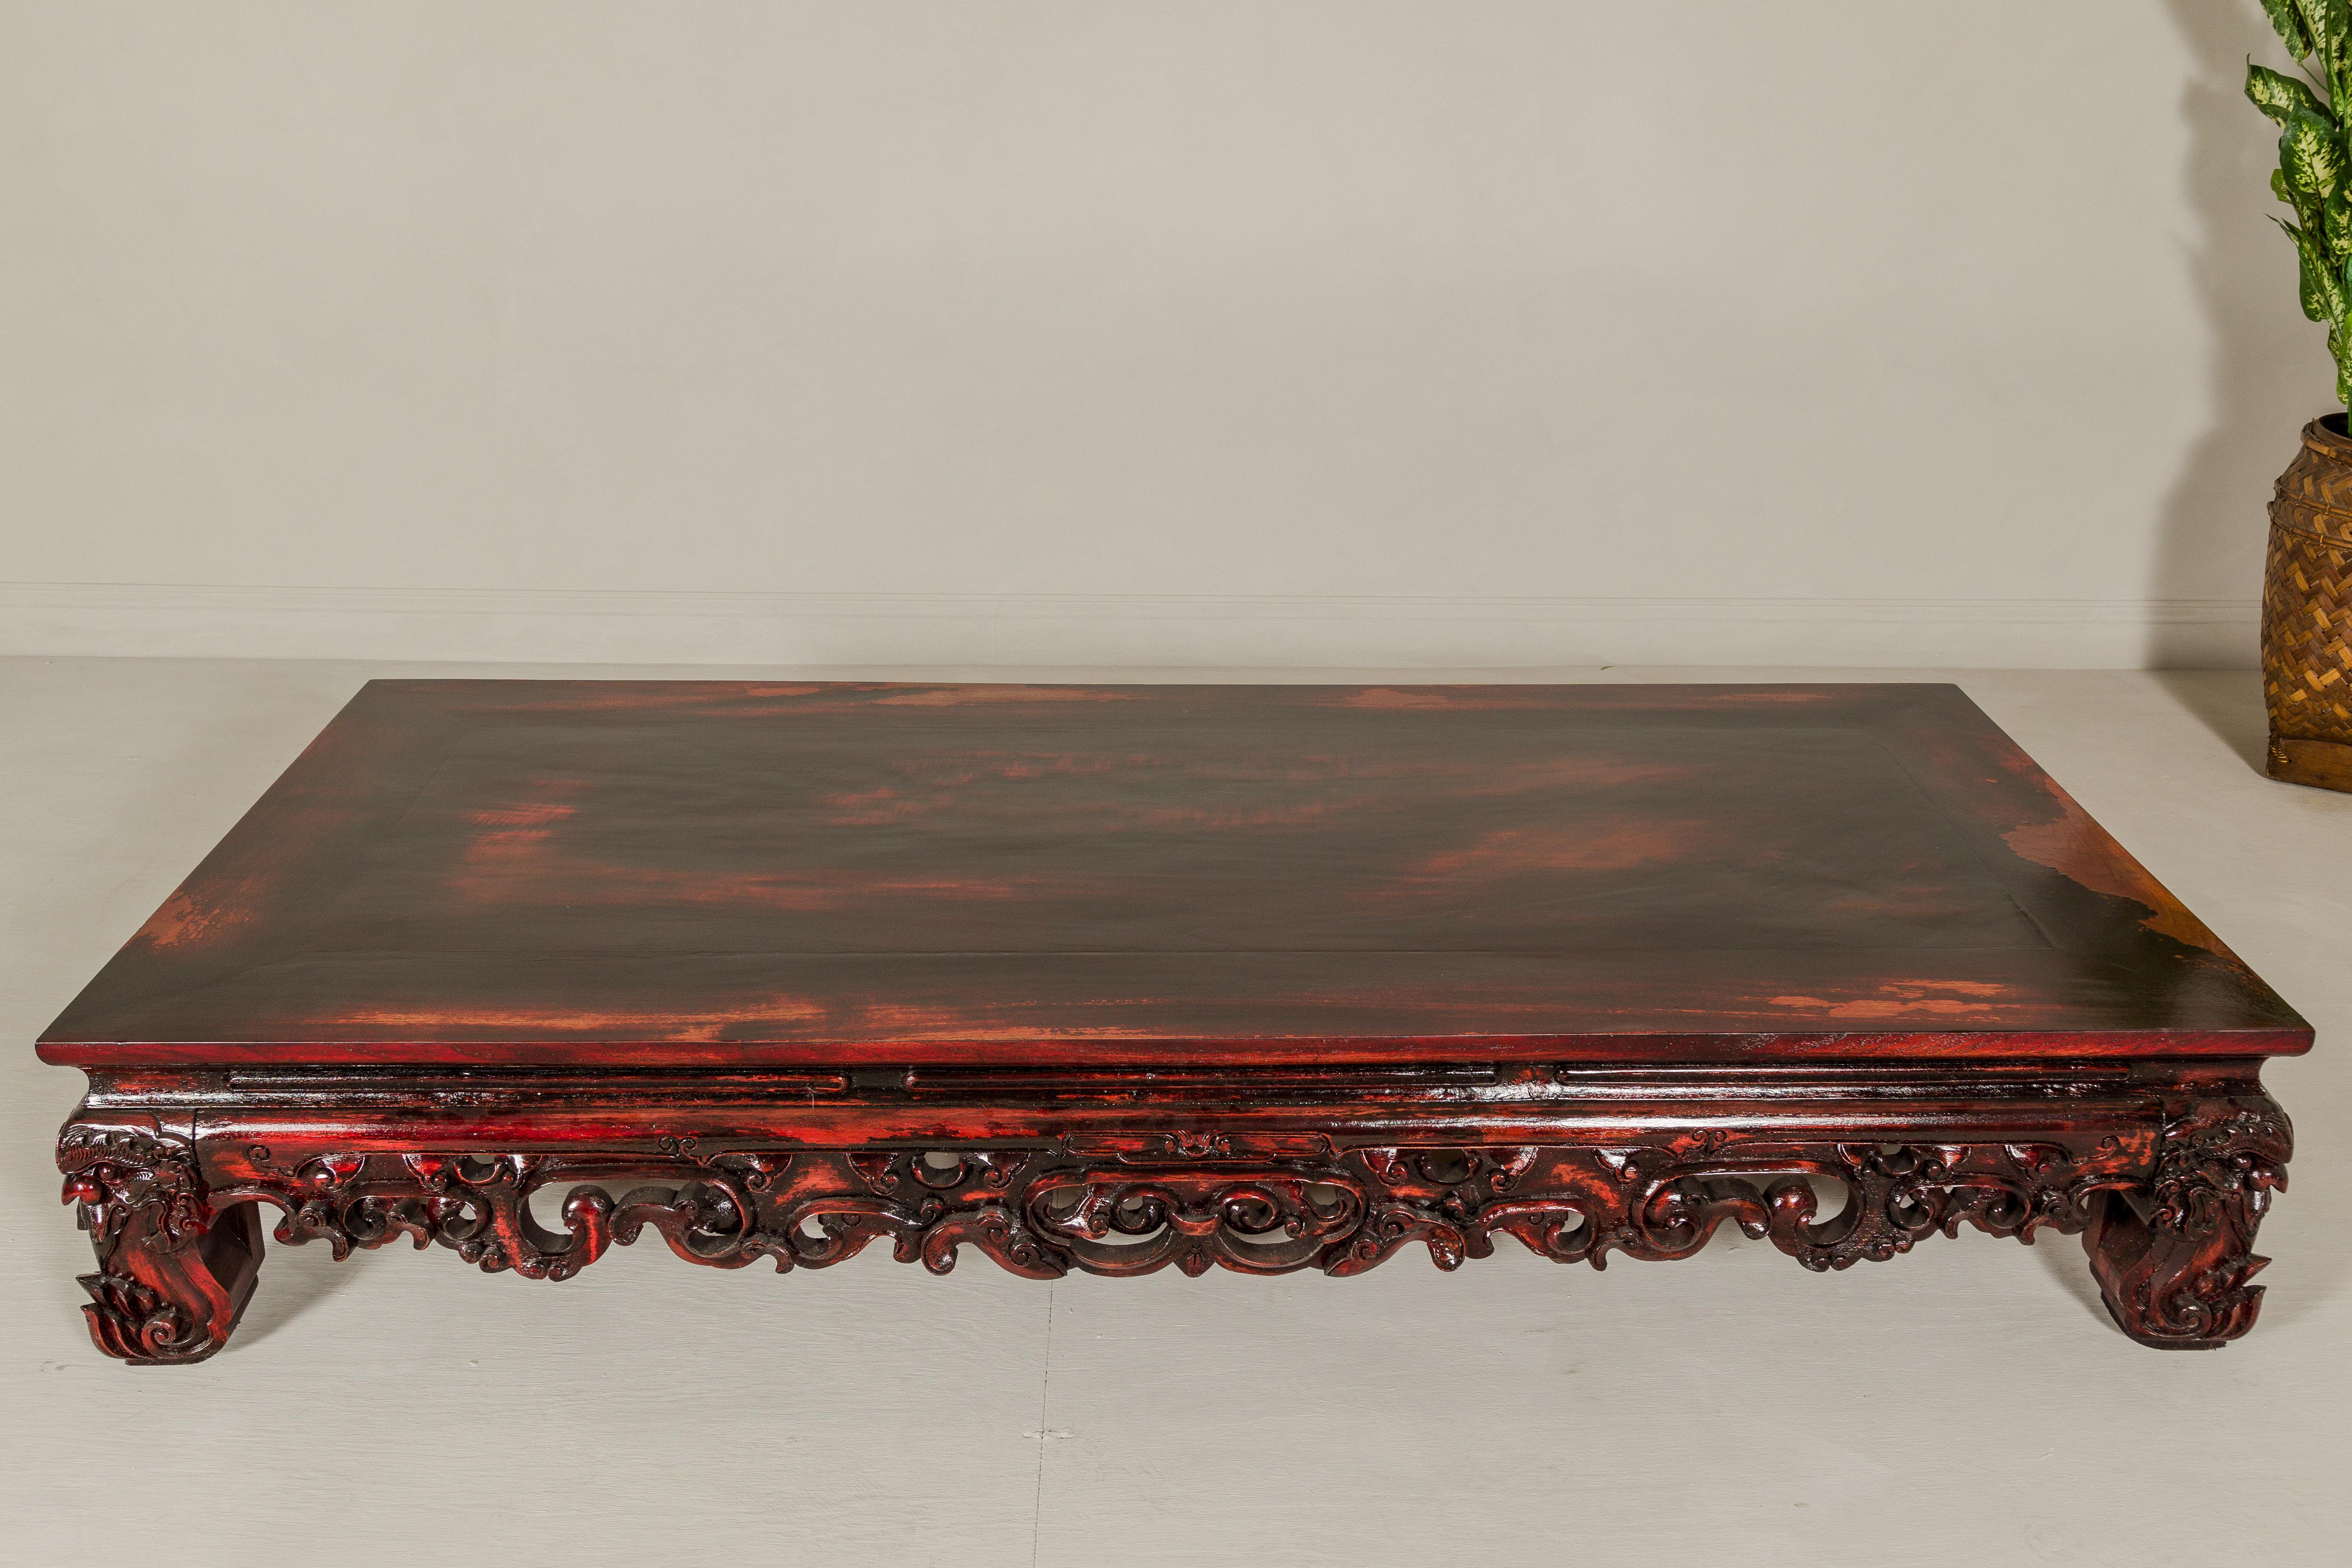 Qing Dynasty Low Kang Coffee Table with Reddish Brown Finish and Carved Décor For Sale 1